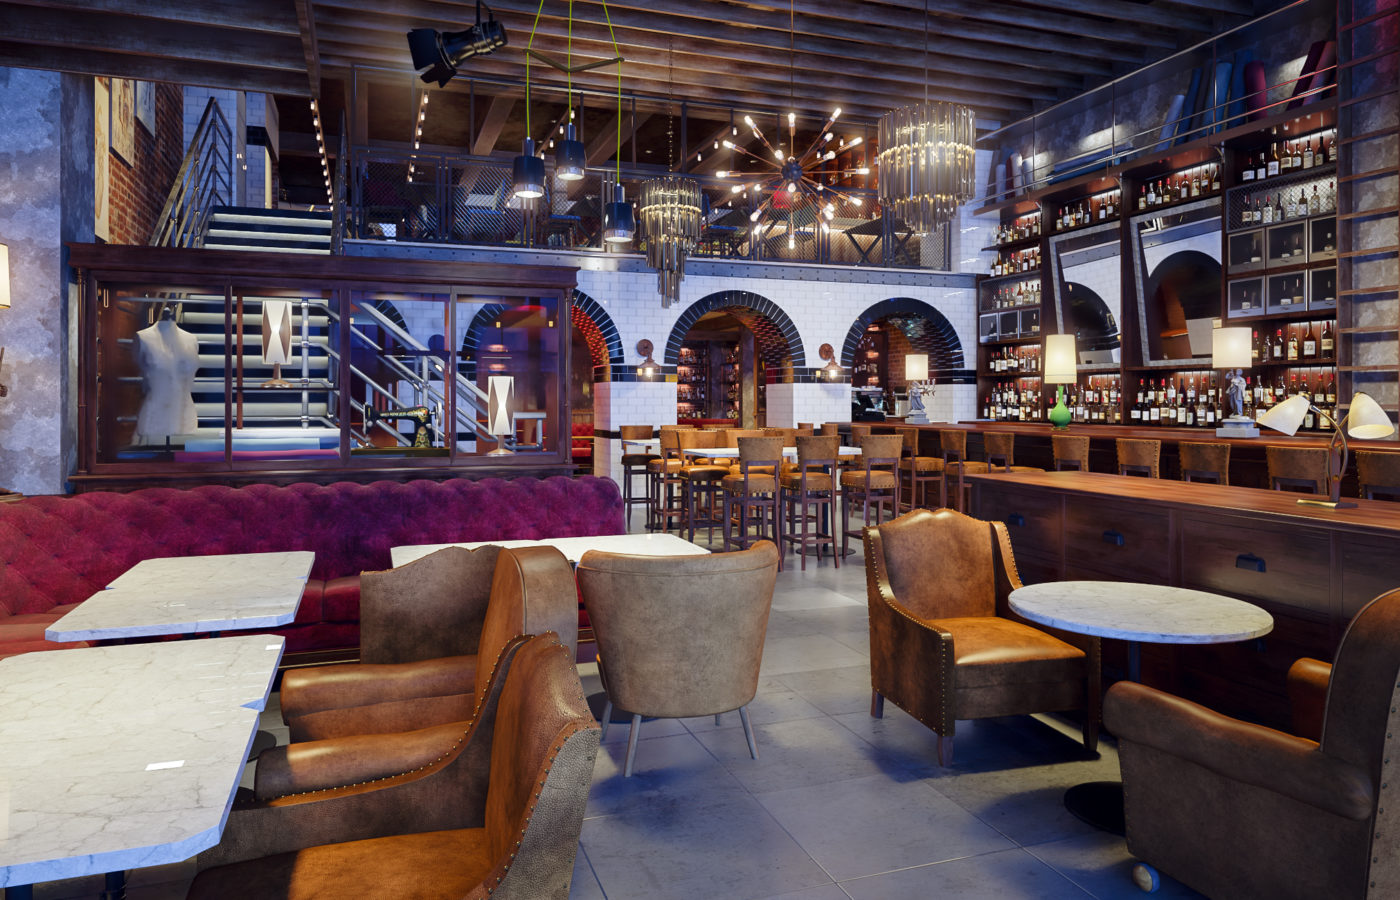 New York Pub, Interior Design. Produced by G-Net 3D based on plans by ODA Architecture. Mixed Contemporary Classic bar feature design with exposed red brick, dark brown bar and brown leather armchairs and feature piece exploding firework light. Exposed beam ceiling.